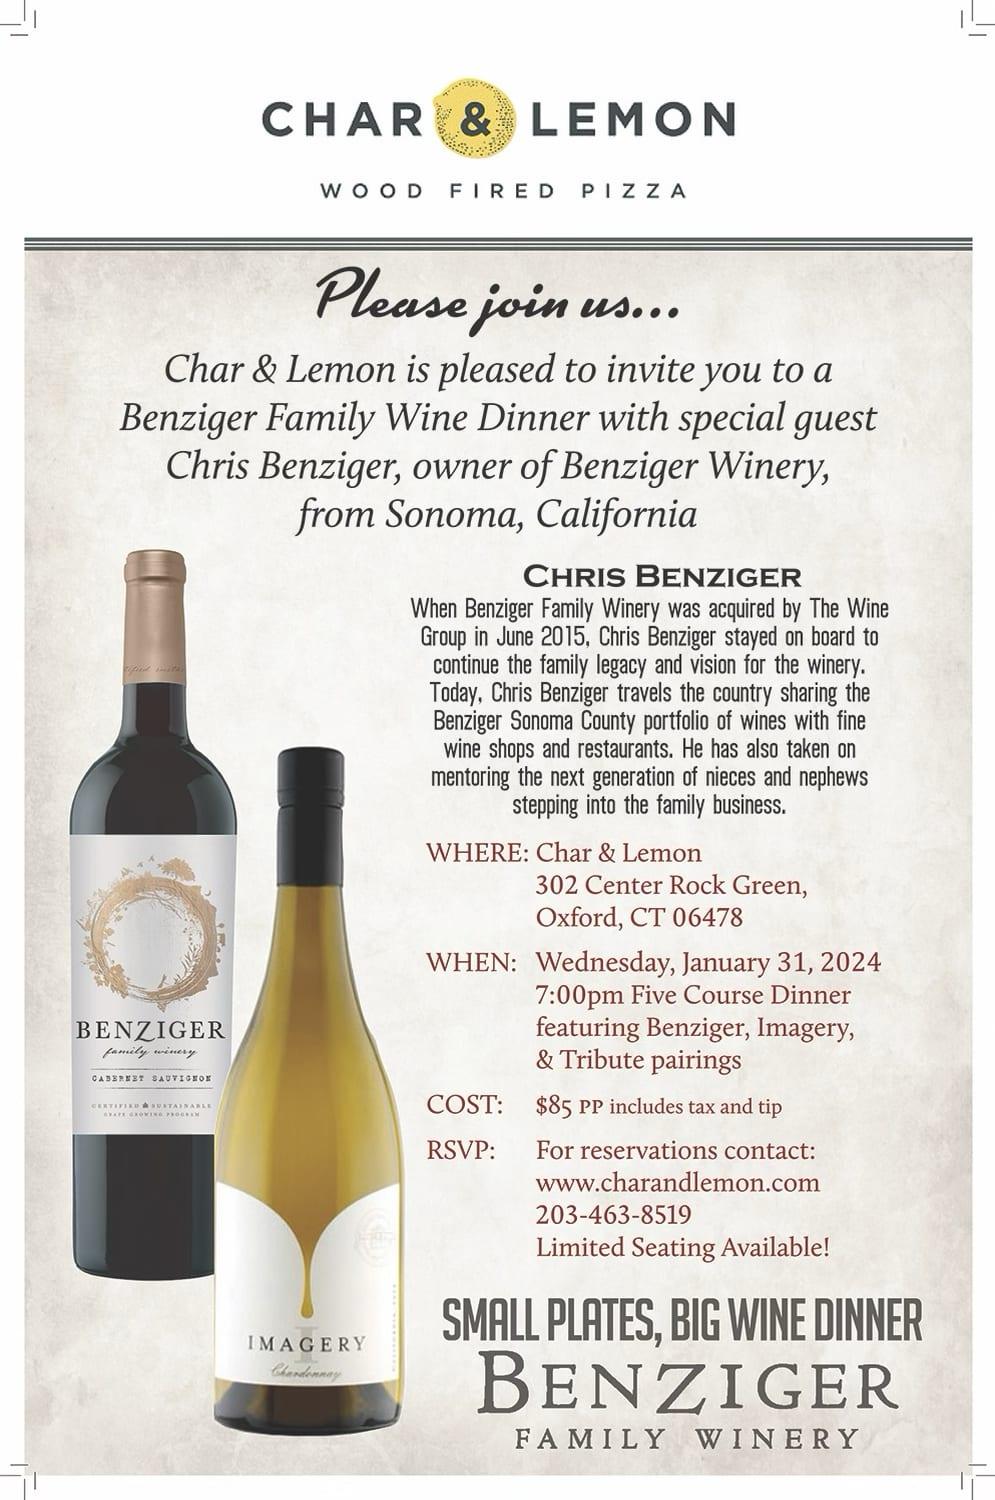 Char & Lemon is pleased to invite you to a Benziger Family Wine Dinner with special guest Chris Benziger, owner of Benziger Winery, from Sonoma, California